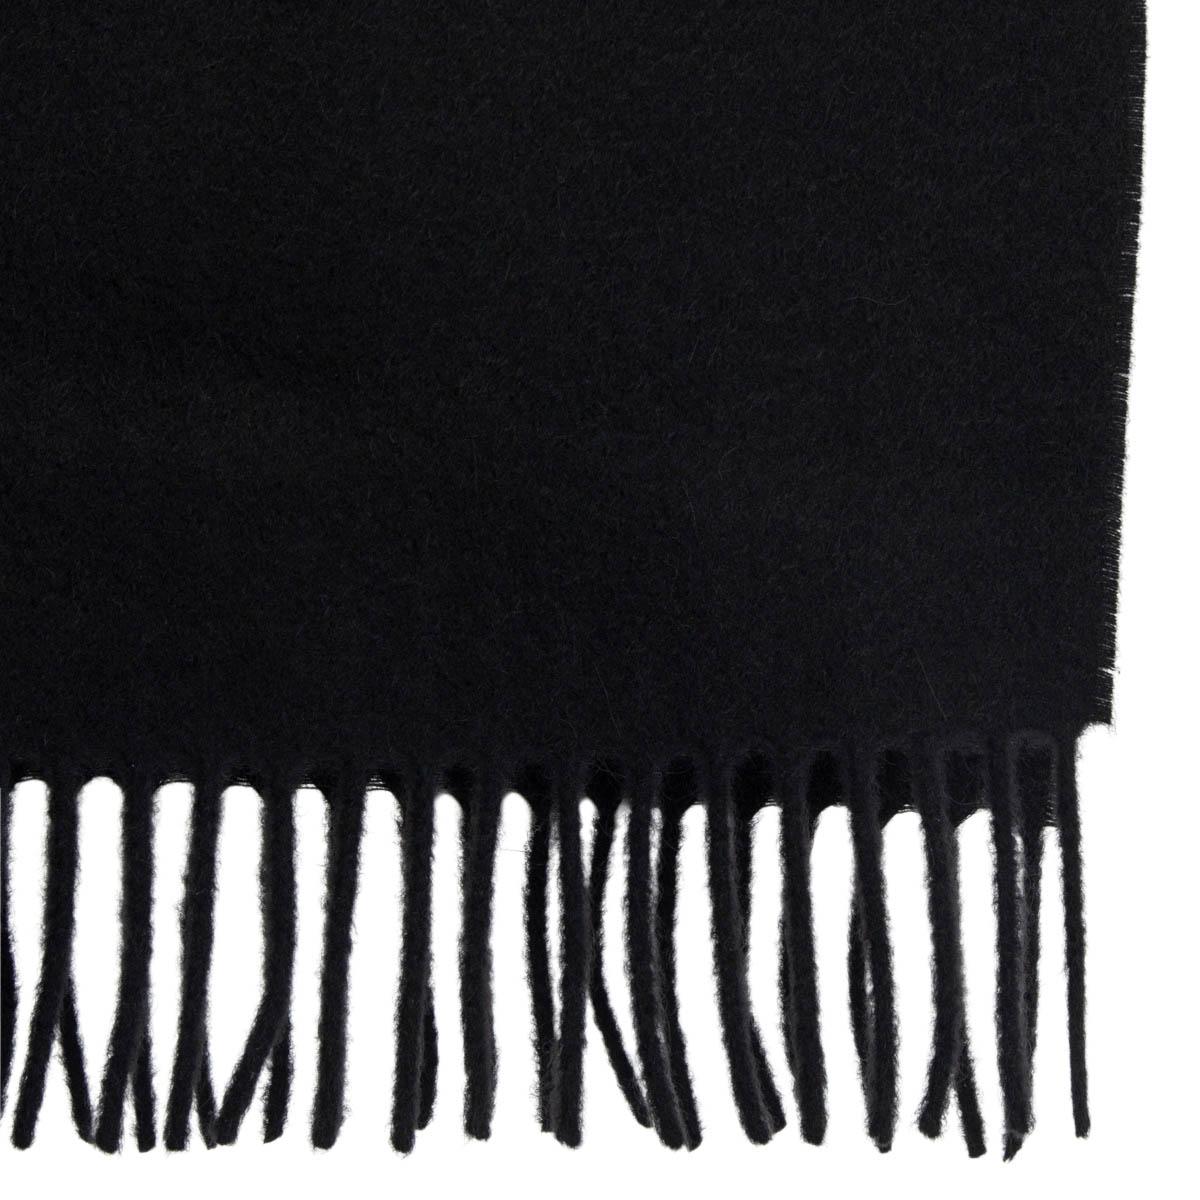 100% authentic Jil Sander shawl in black cashmere (100%). Features fringes at both ends and a 'Jil Sander' embroidery. Has been worn and is in excellent condition.

Measurements
Width	36cm (14in)
Height	165cm (64.4in)

All our listings include only